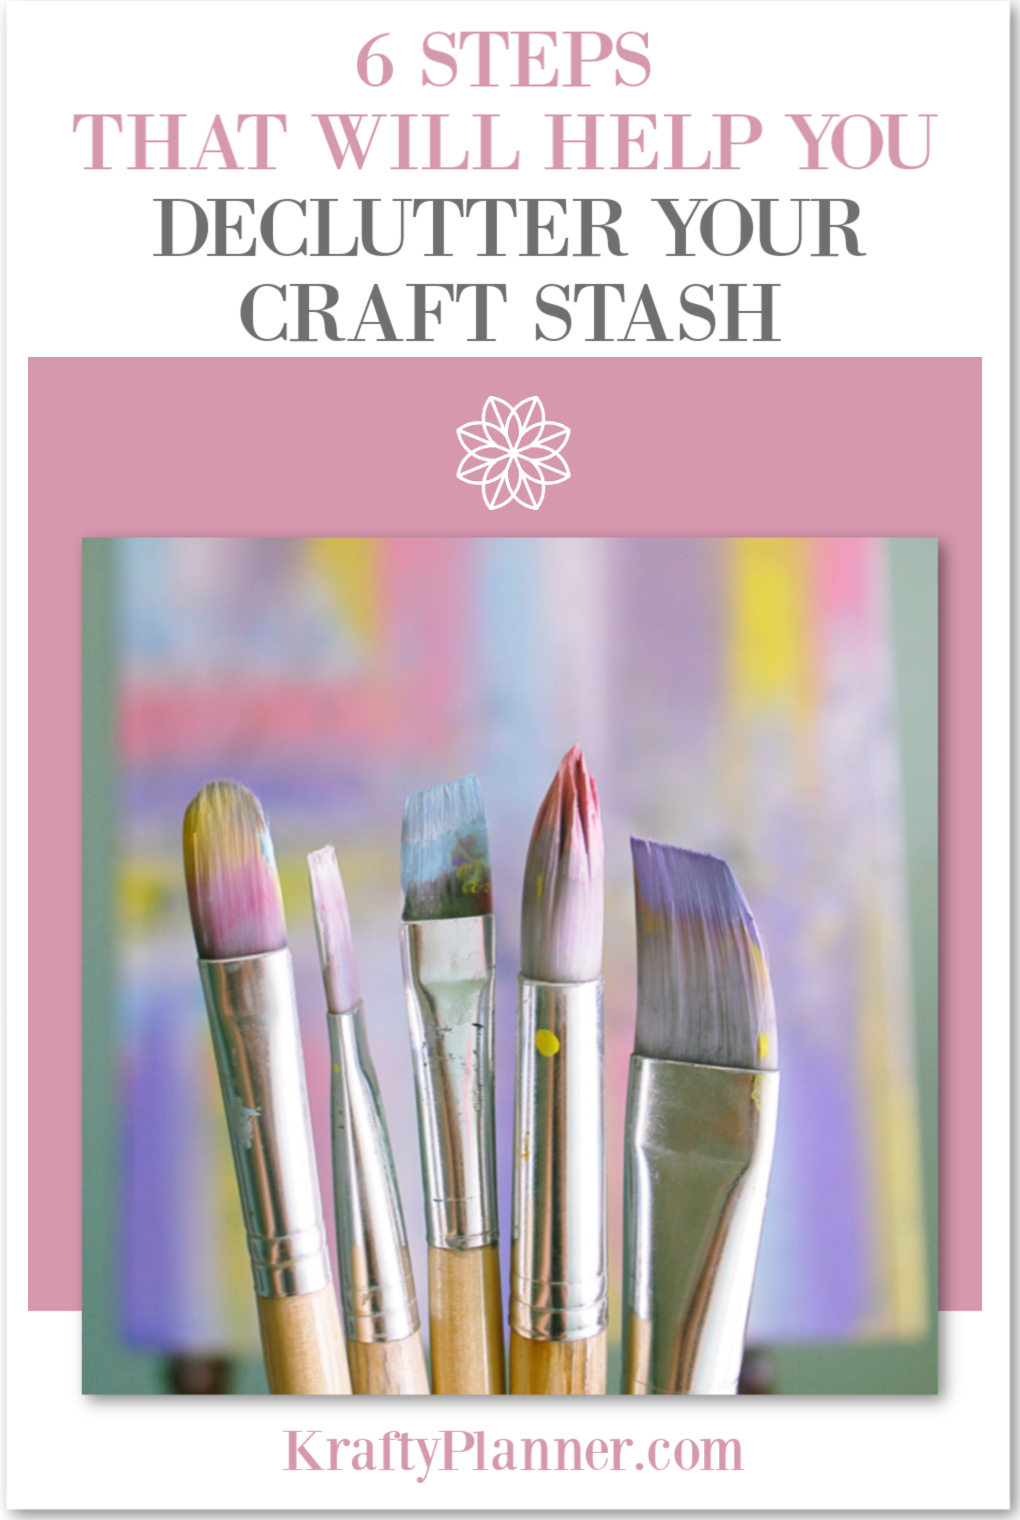 6 Steps That Will Help You Declutter Your Craft Stash PIN 3.png